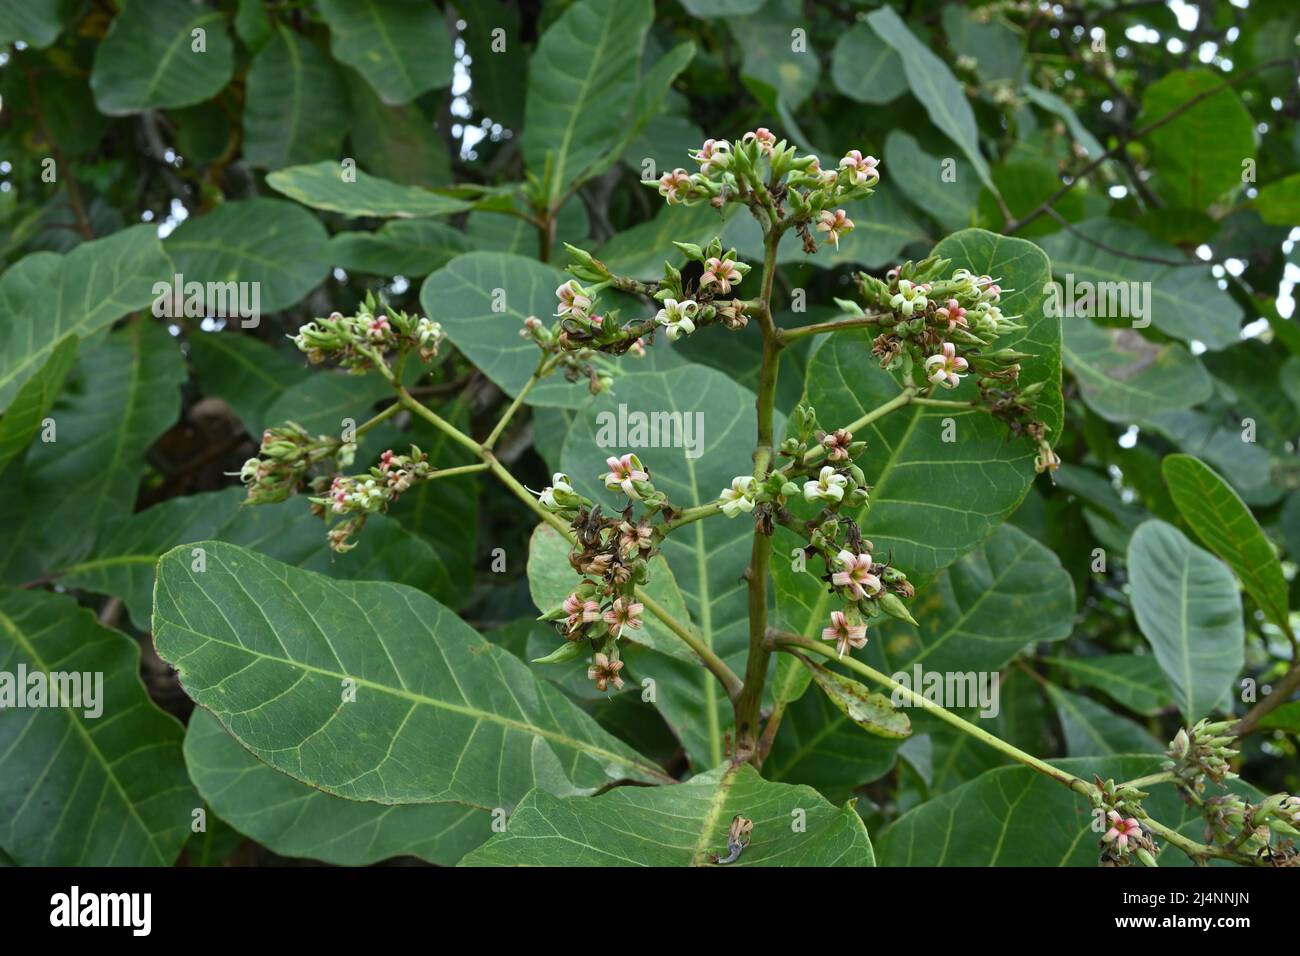 Flowers of the cashew plant (Anacardium occidentale), bloomed as a cluster Stock Photo